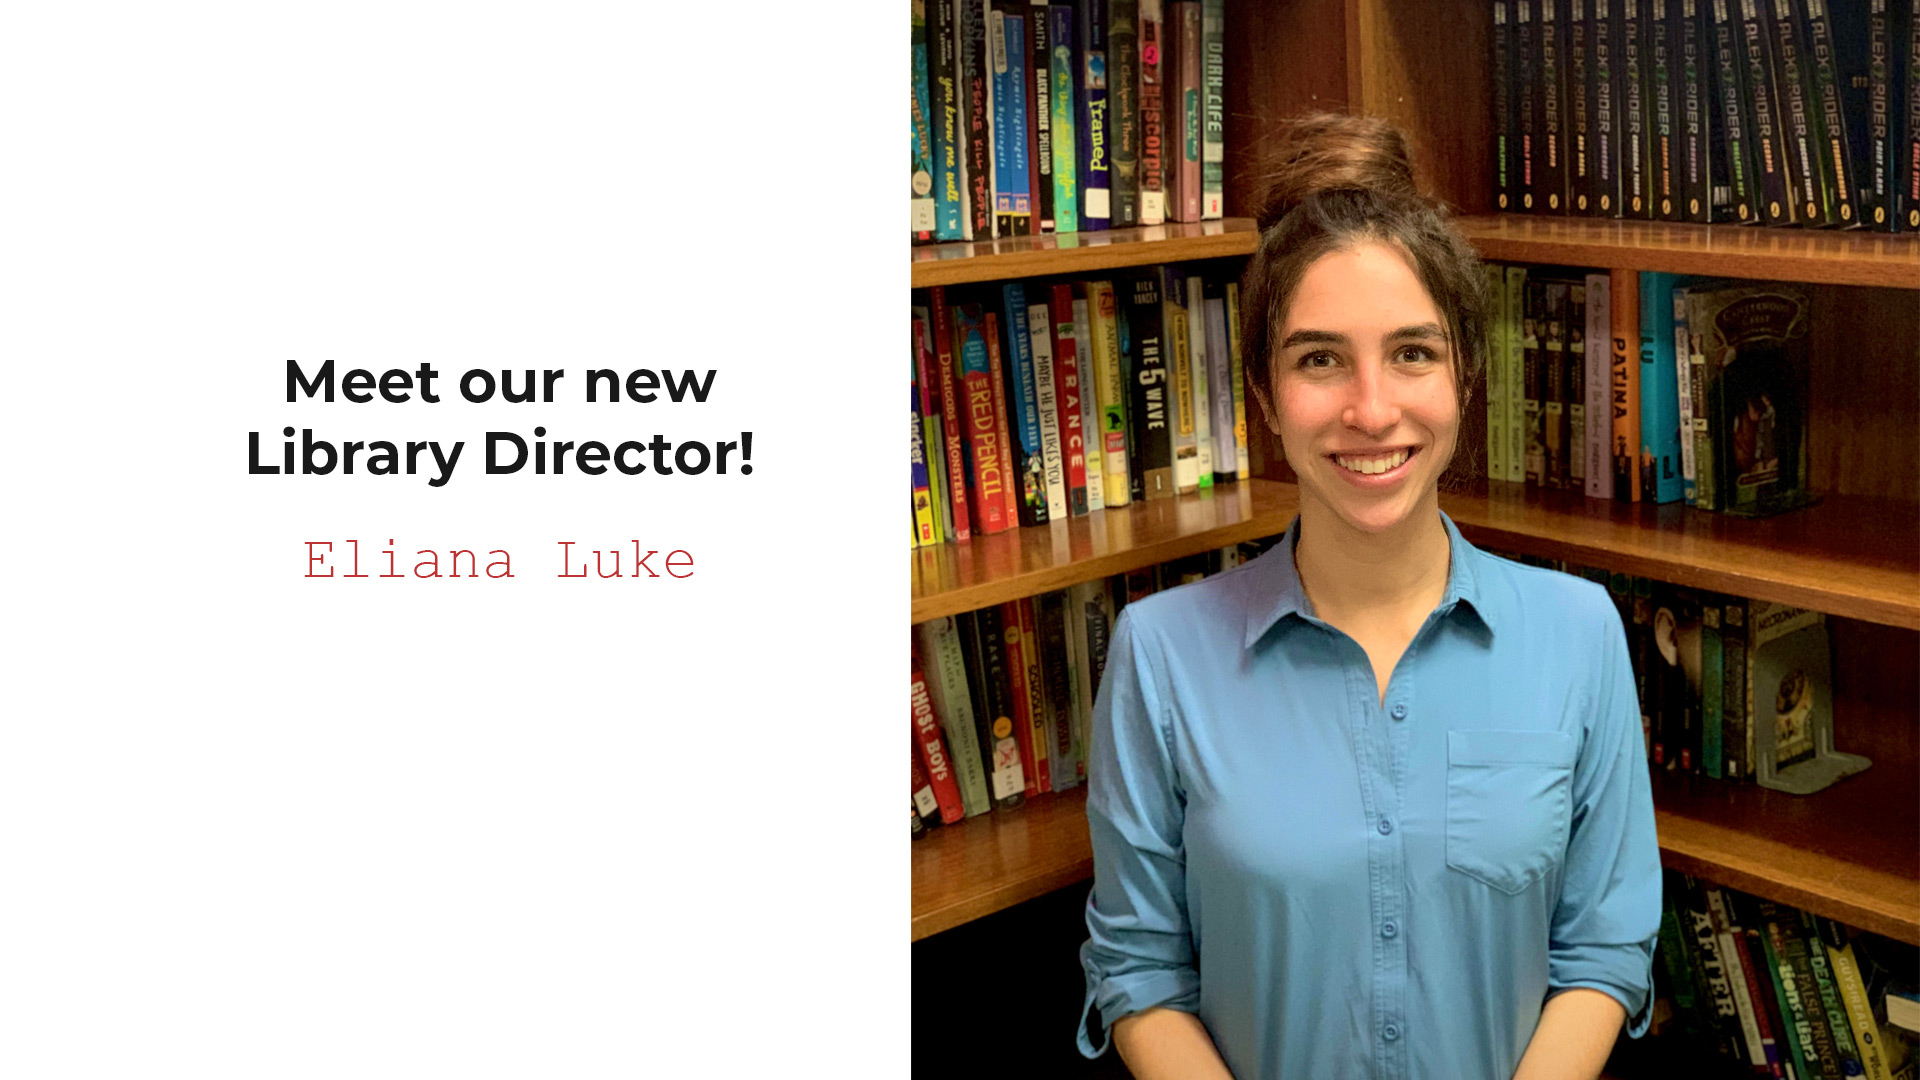 Meet our new Library Director